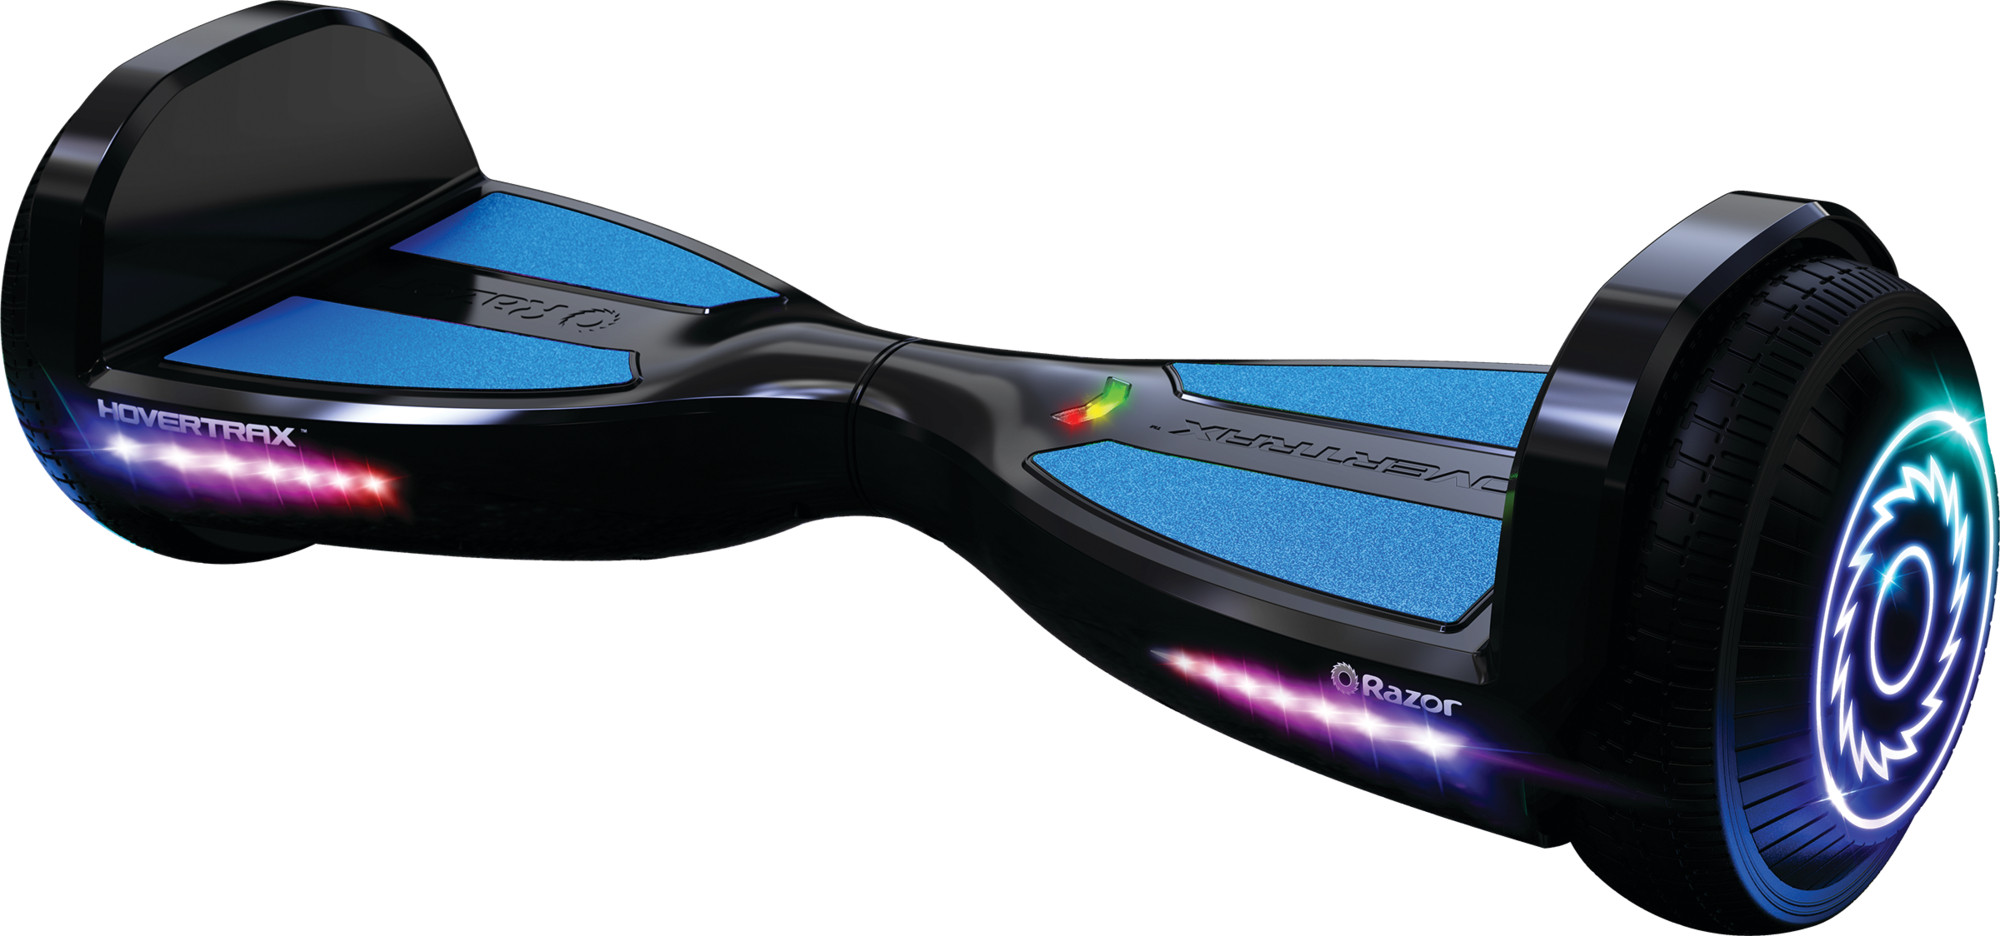 Razor Black Label Hovertrax - Black, UL2272 Hoverboard for Child Ages 8+, Customizable Color Decals - image 1 of 15